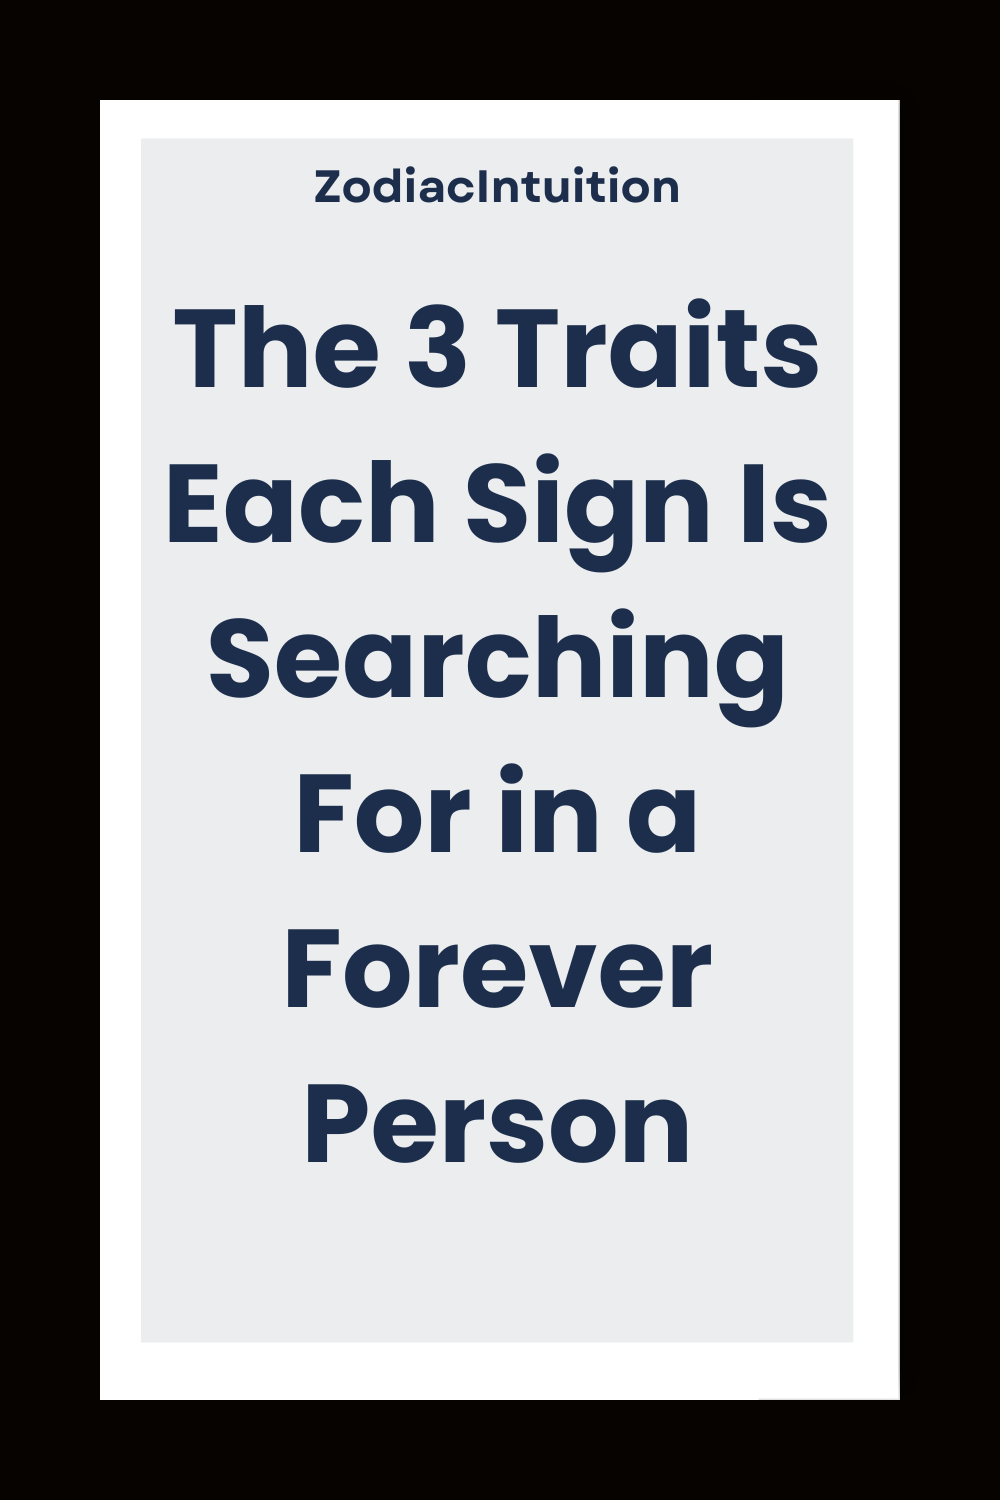 The 3 Traits Each Sign Is Searching For in a Forever Person